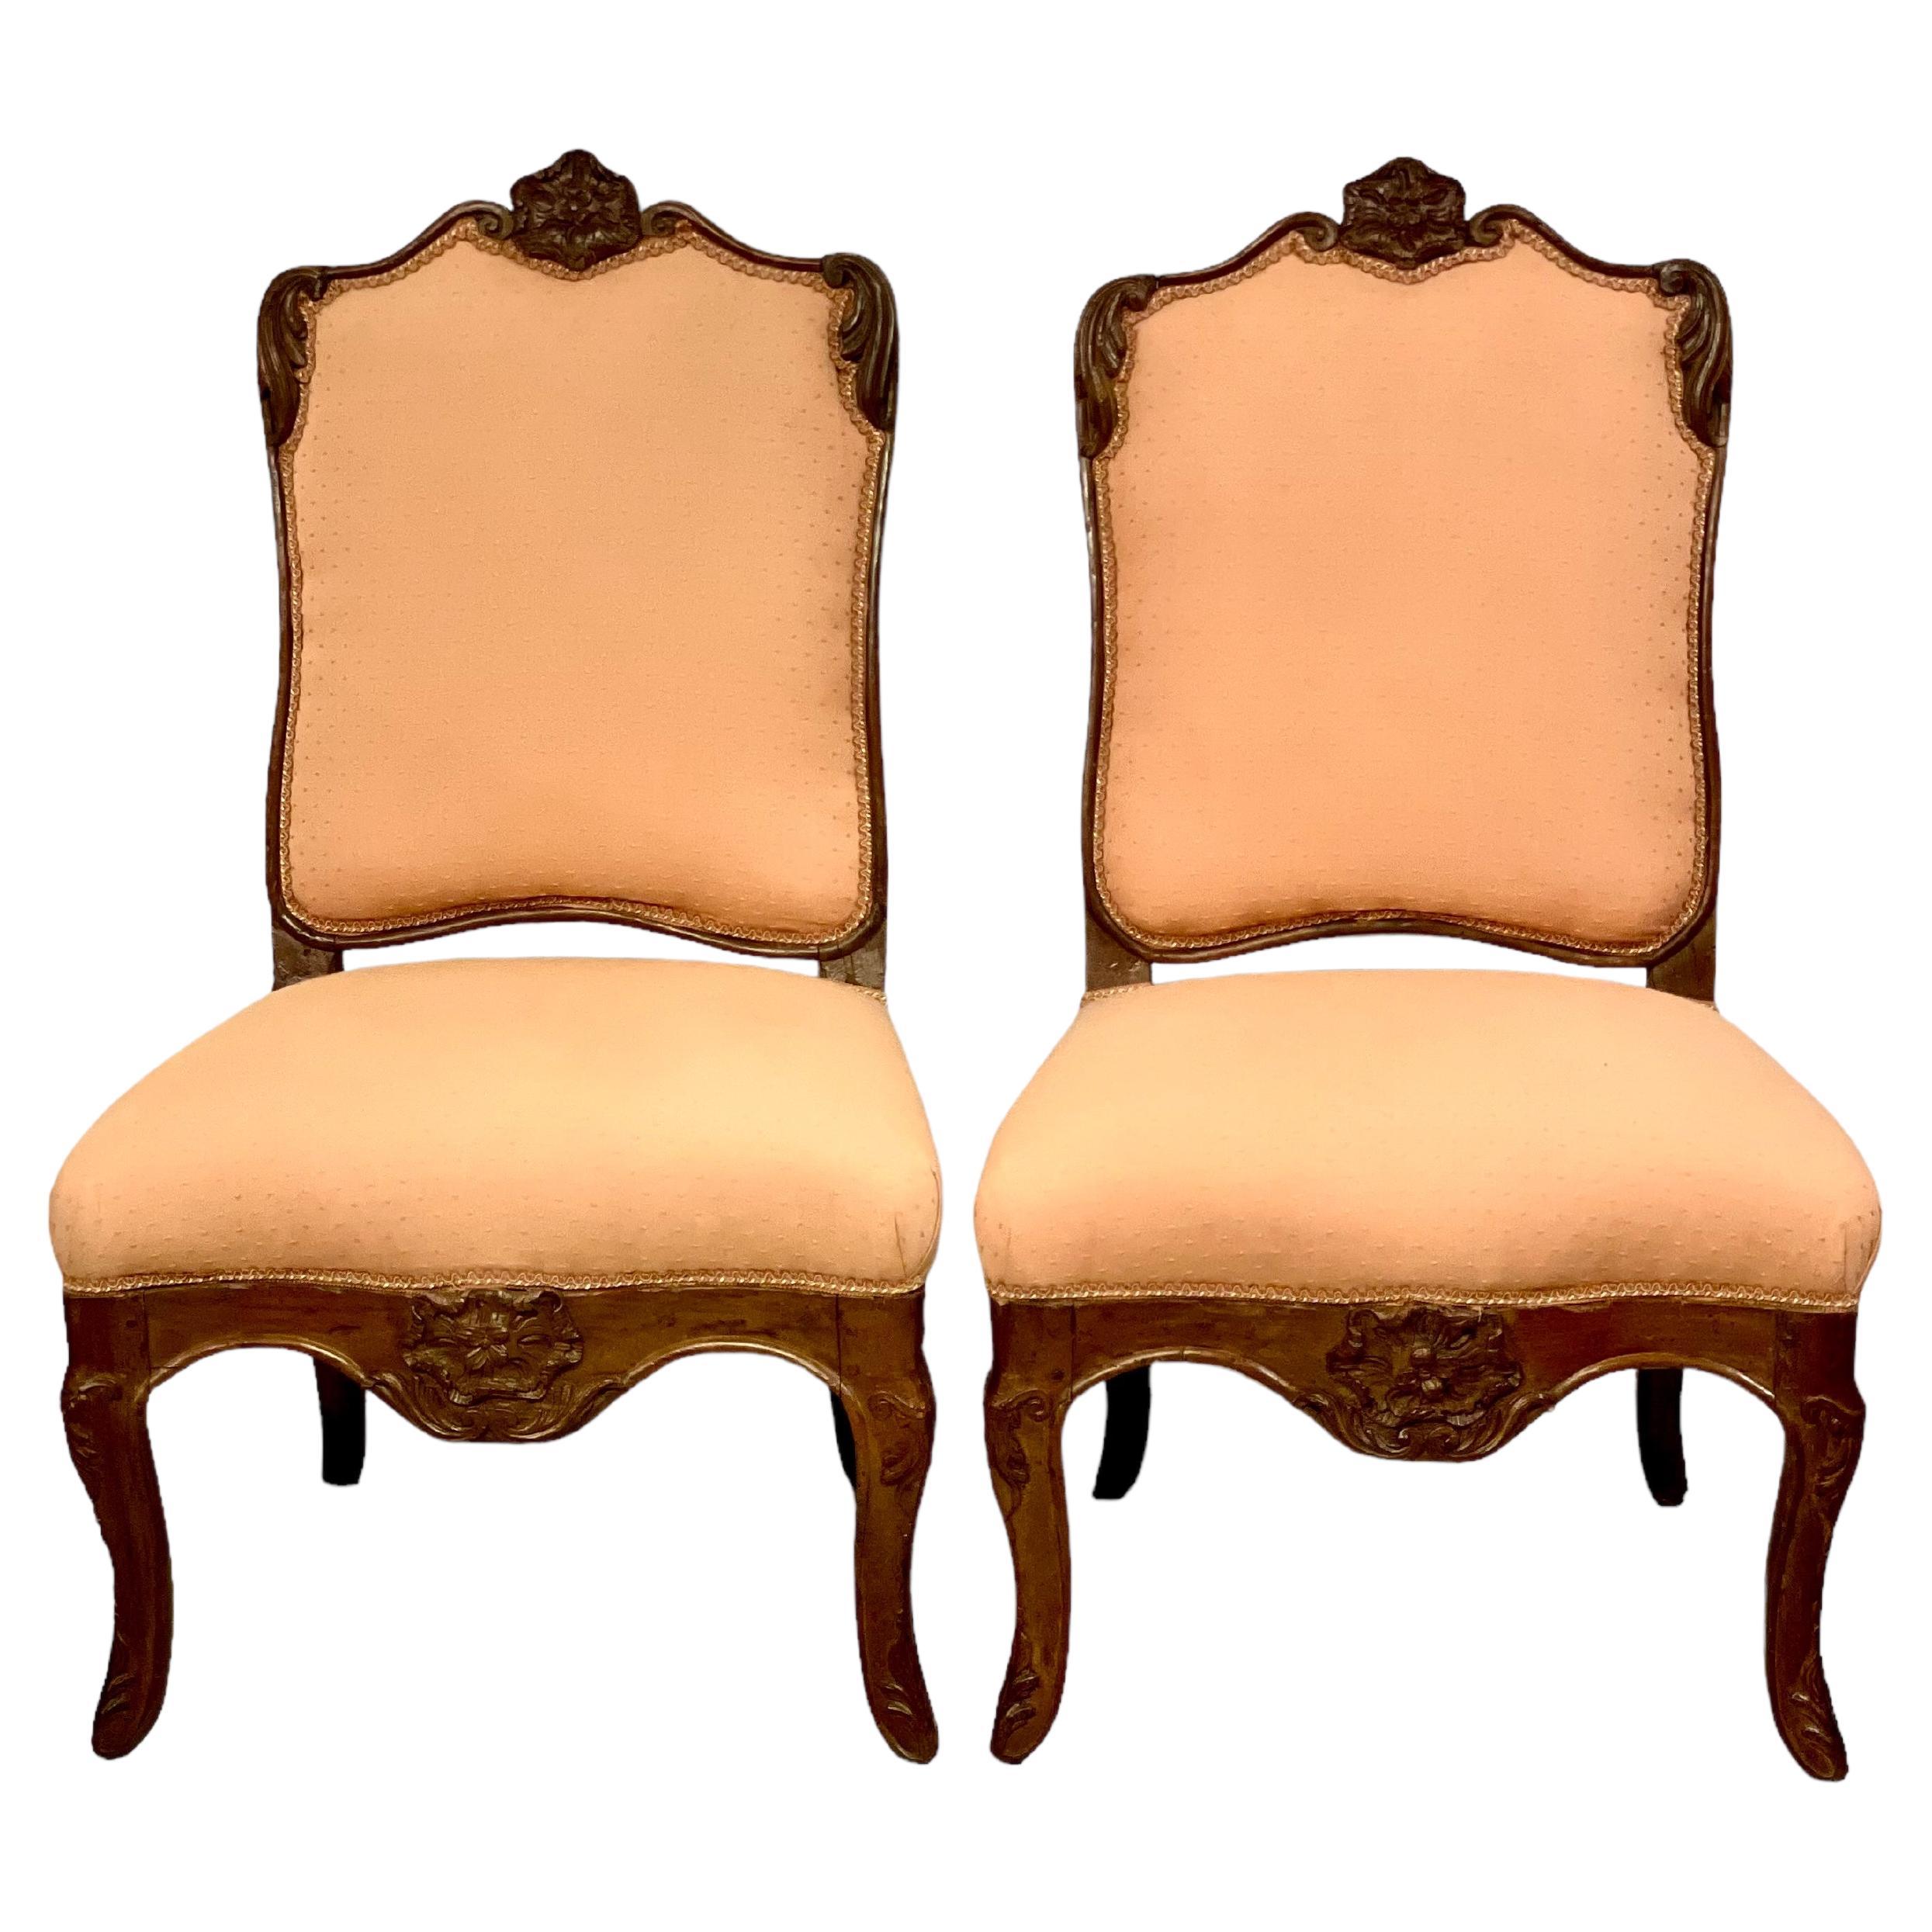 1720s French Regence Pair of Beech Slipper Chairs  For Sale